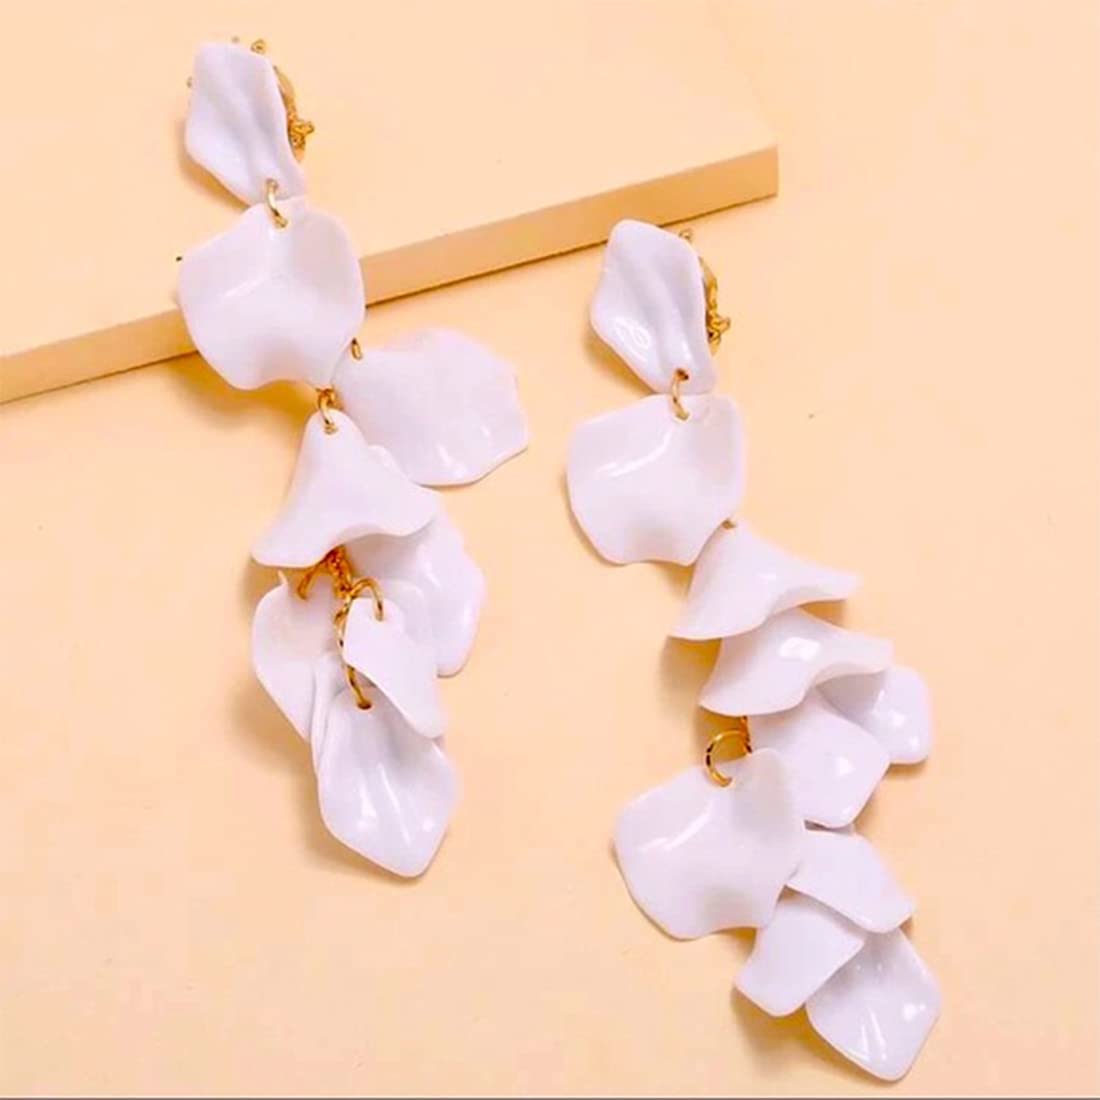 Yellow Chimes Elegant Latest Fashion Gold Plated White Colour Flower Petals Design Dangler Earrings for Women and Girls, Medium (Model Number: YCFJER-PETLDNG-WH)